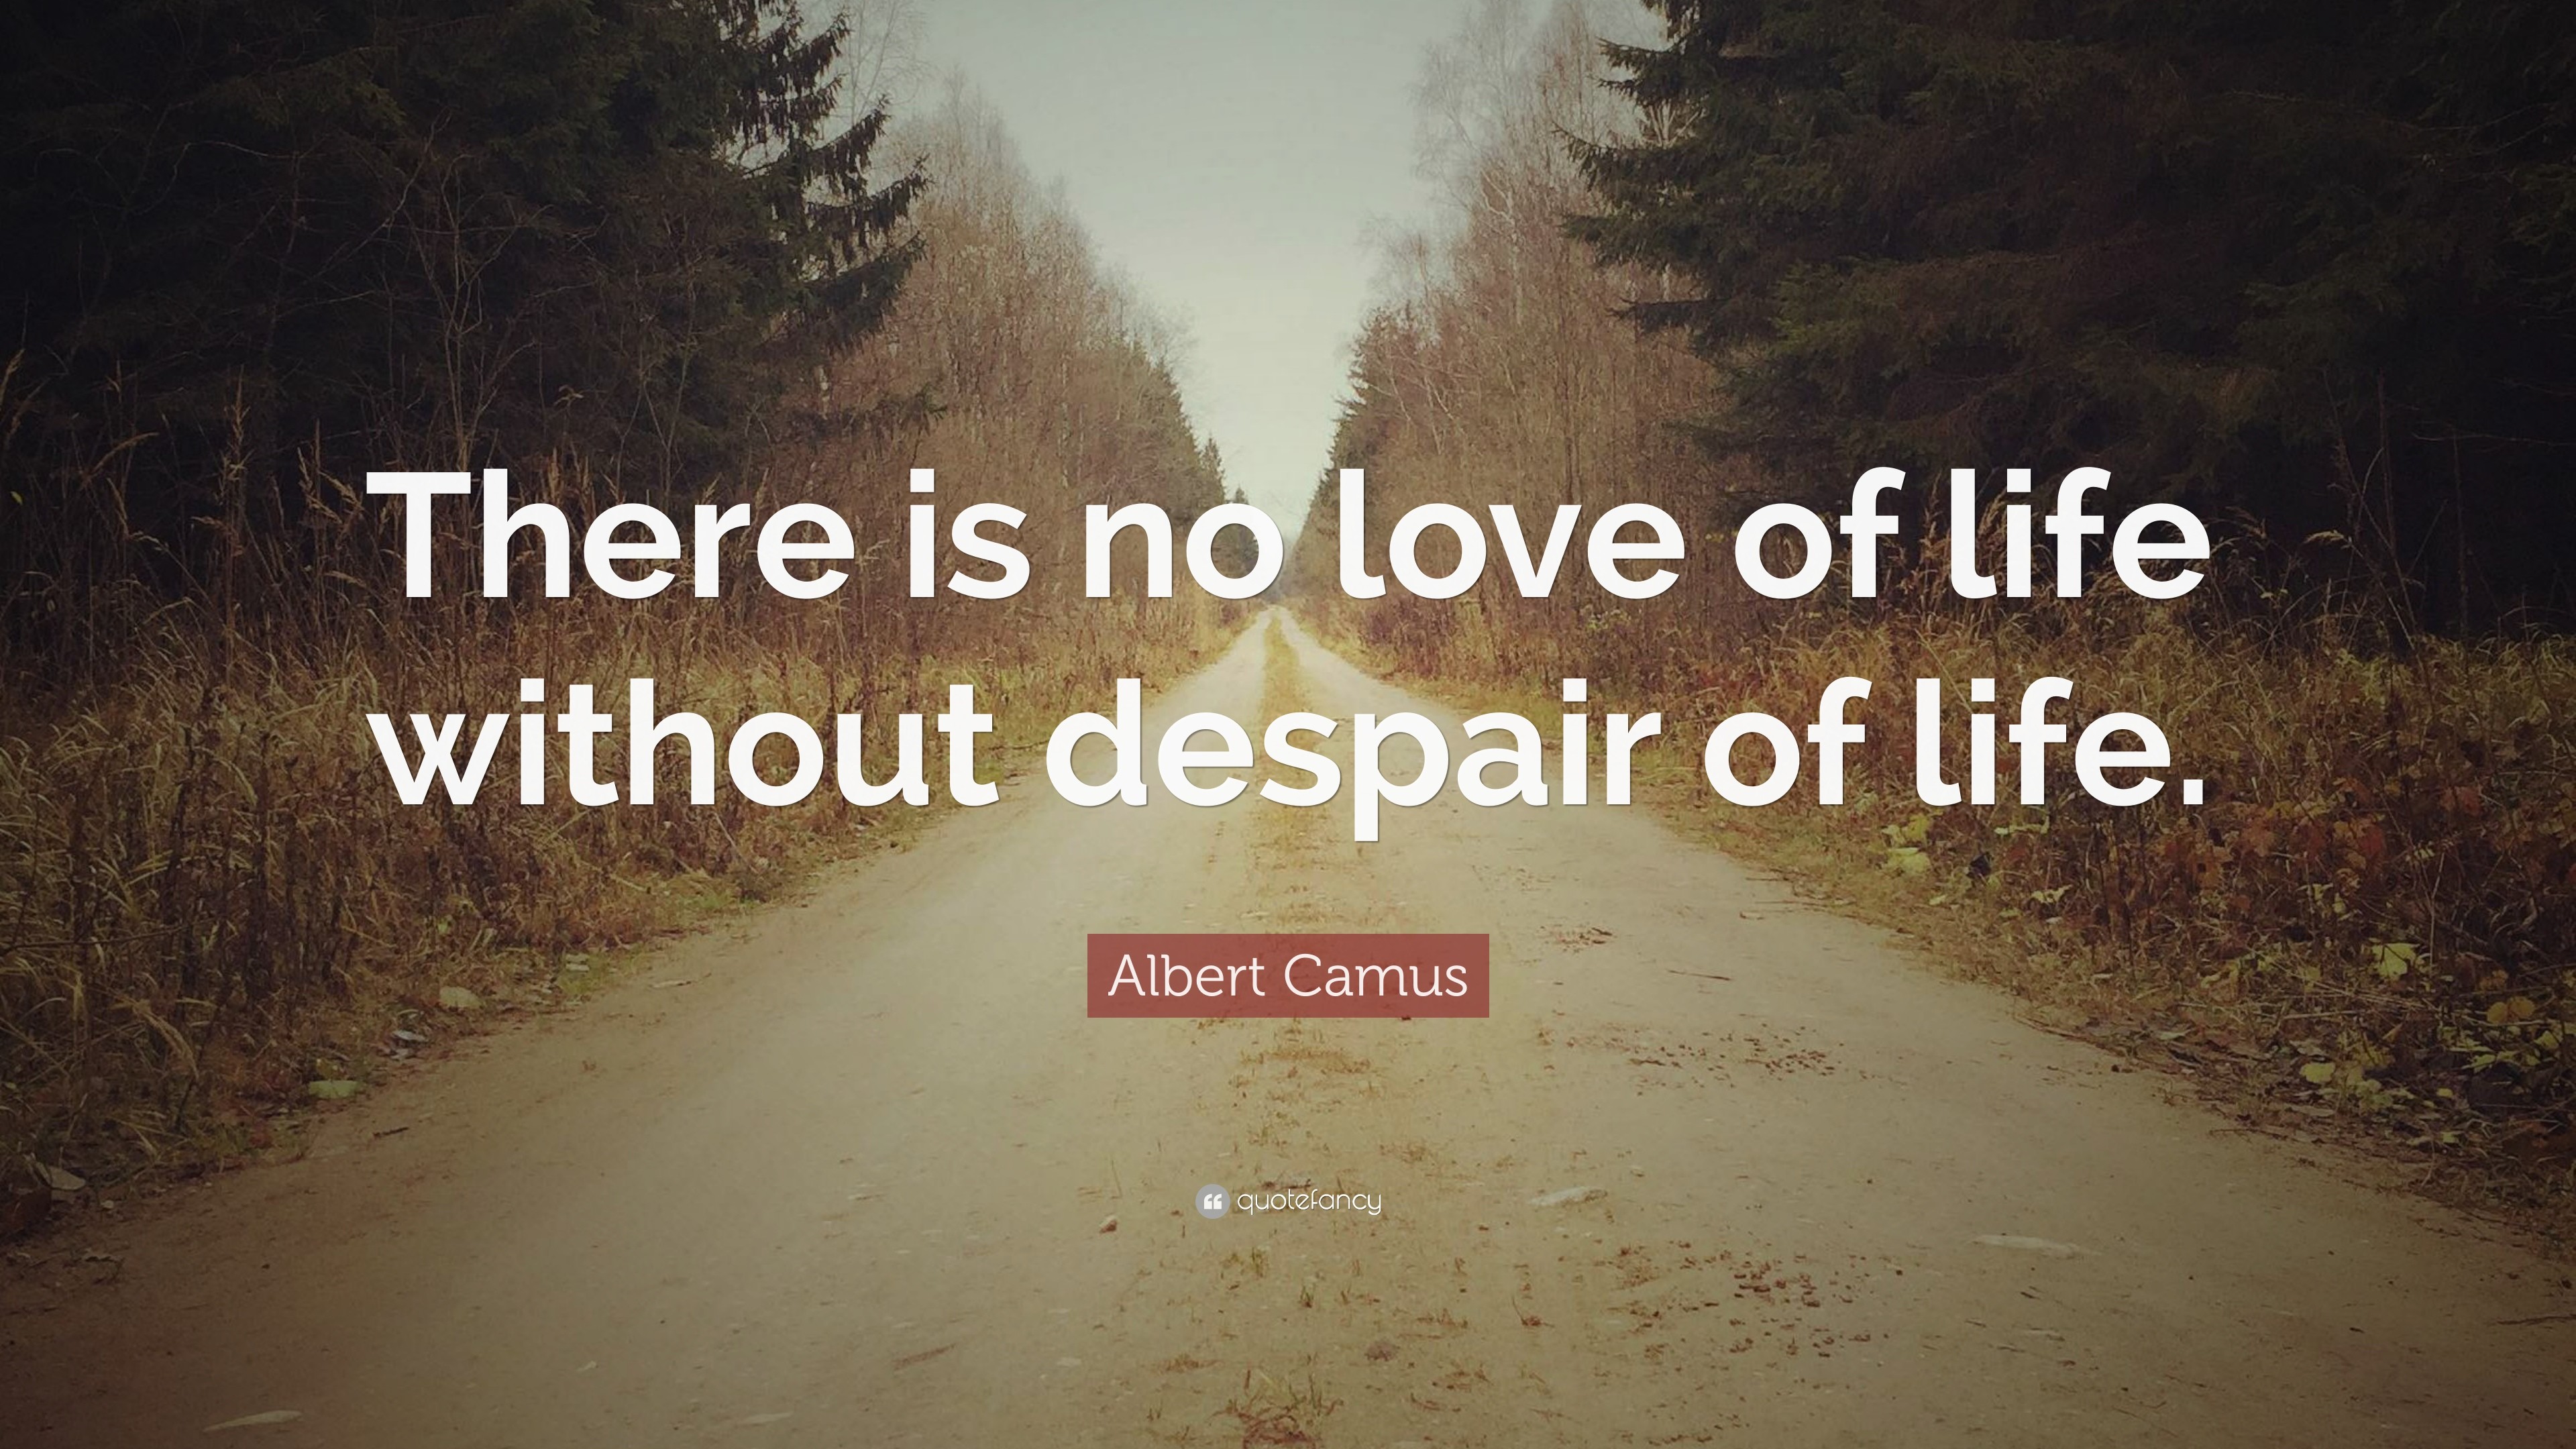 3840x2160 Albert Camus Quote: “There is no love of life without despair of life.